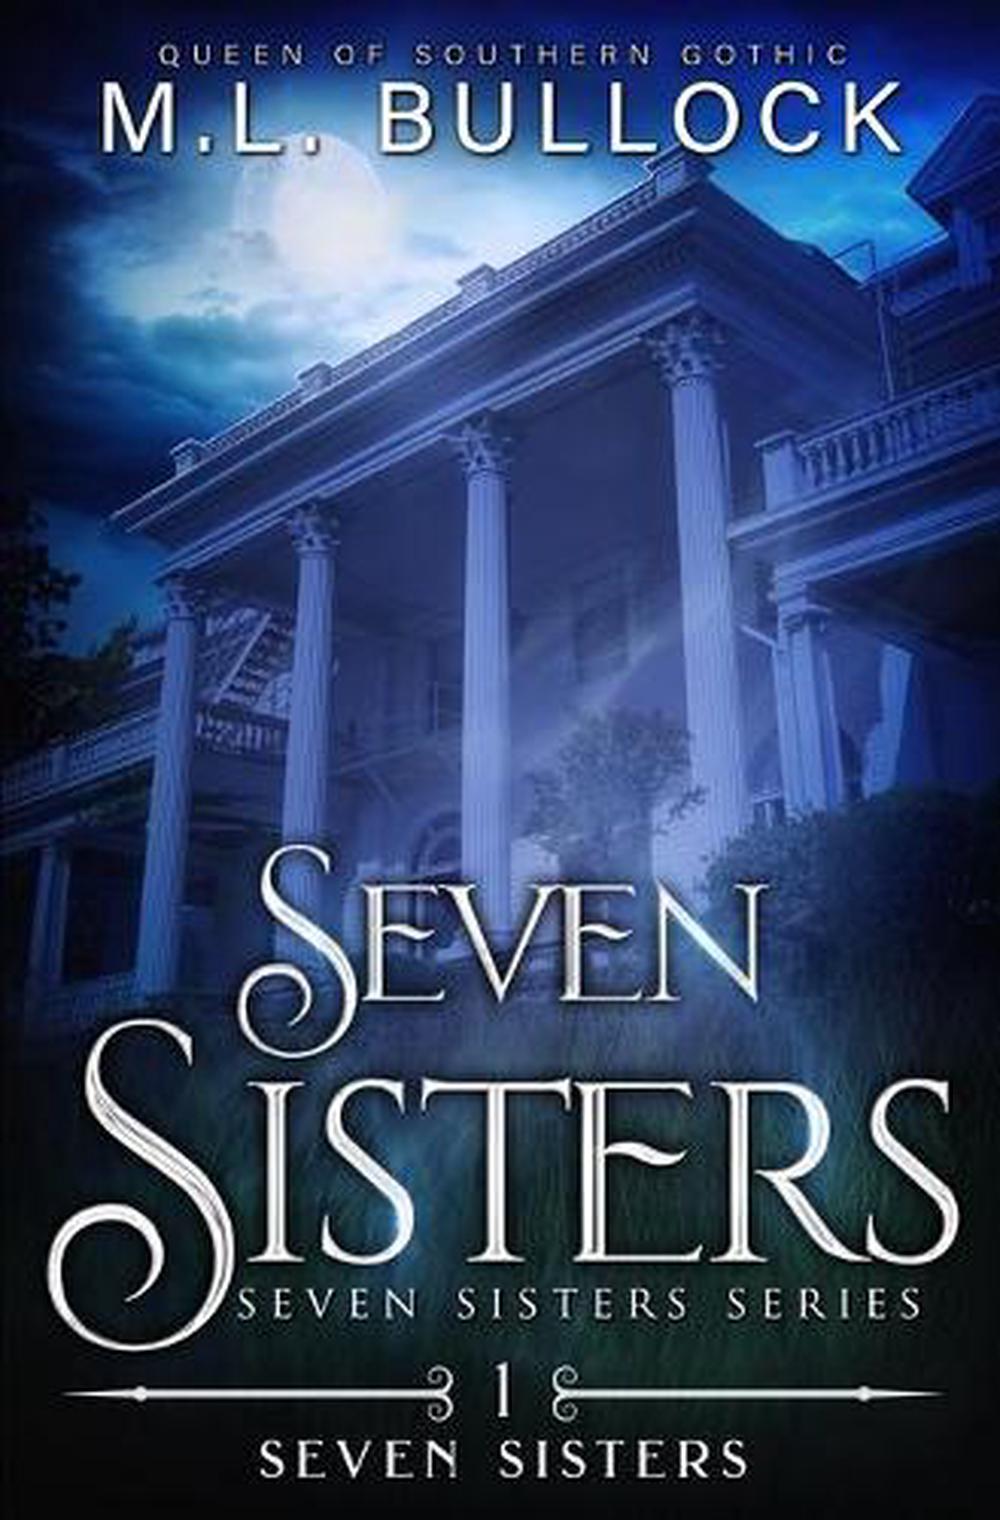 the seven sisters book review